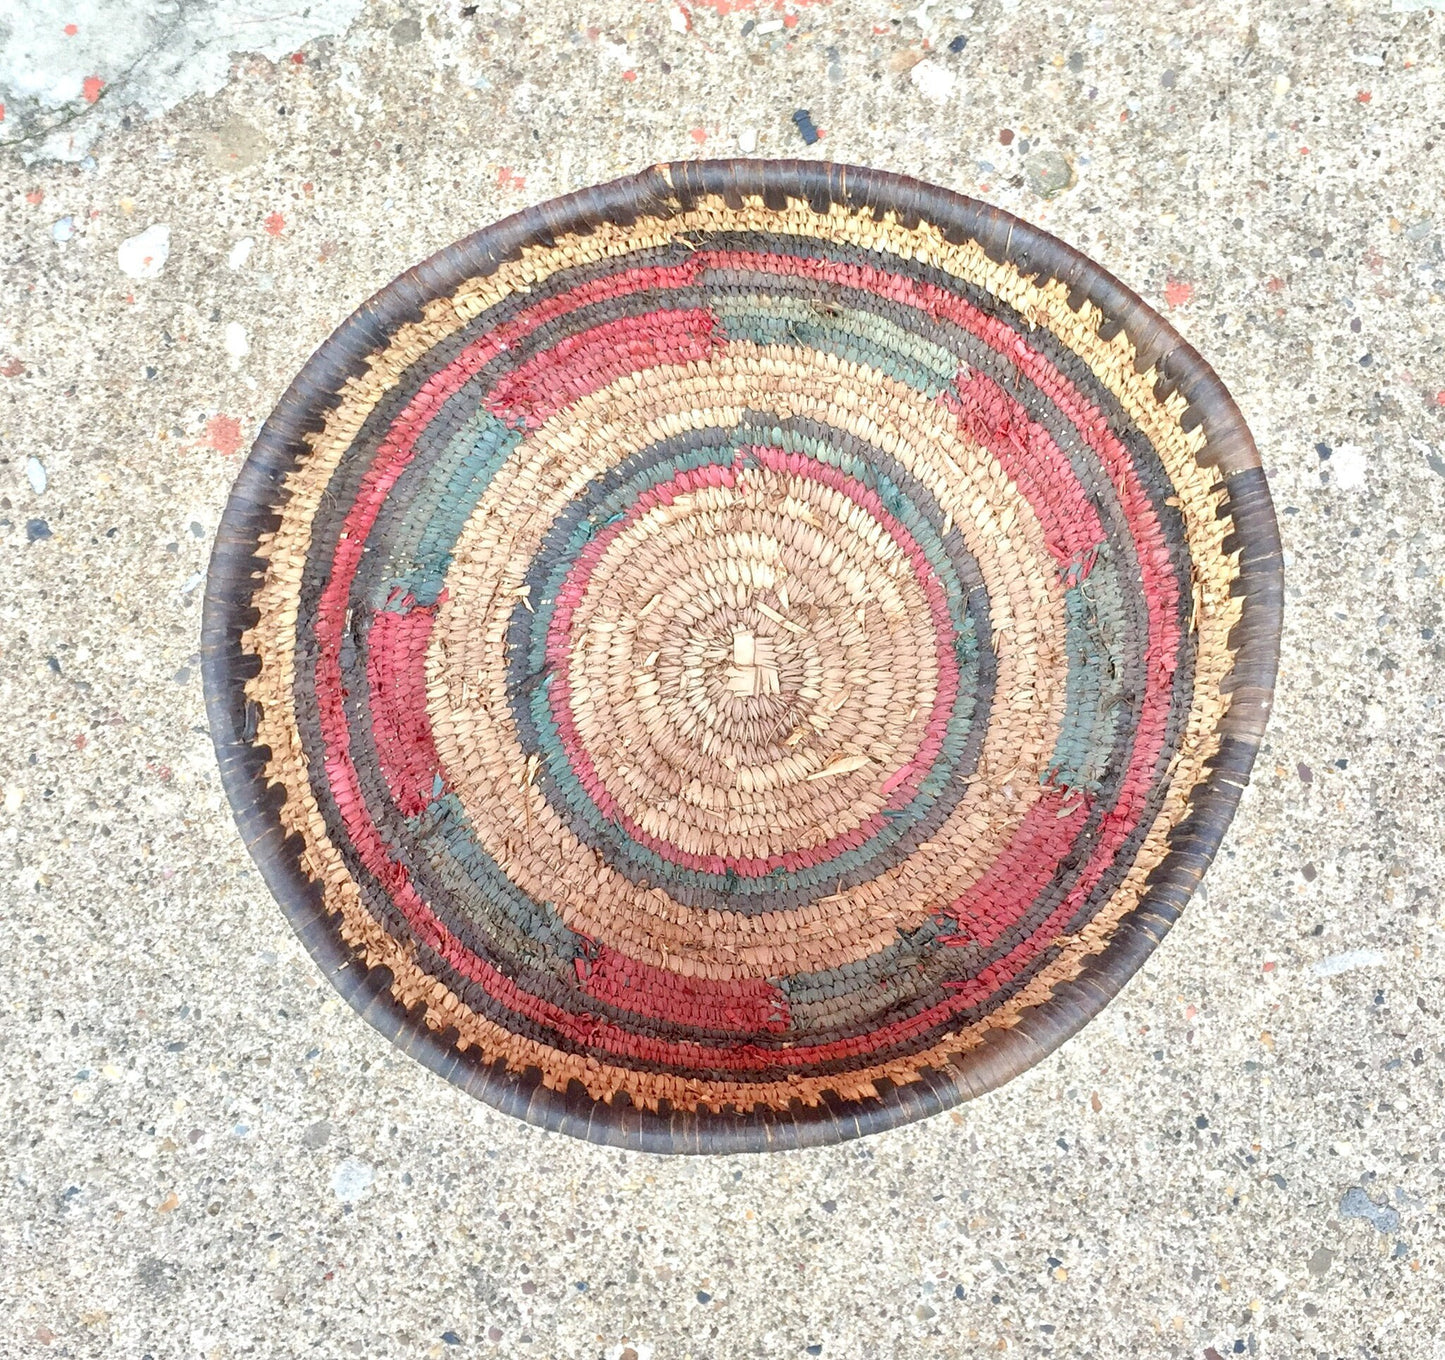 Round woven basket with colorful concentric rings in shades of red, orange, yellow, green and blue on a concrete surface